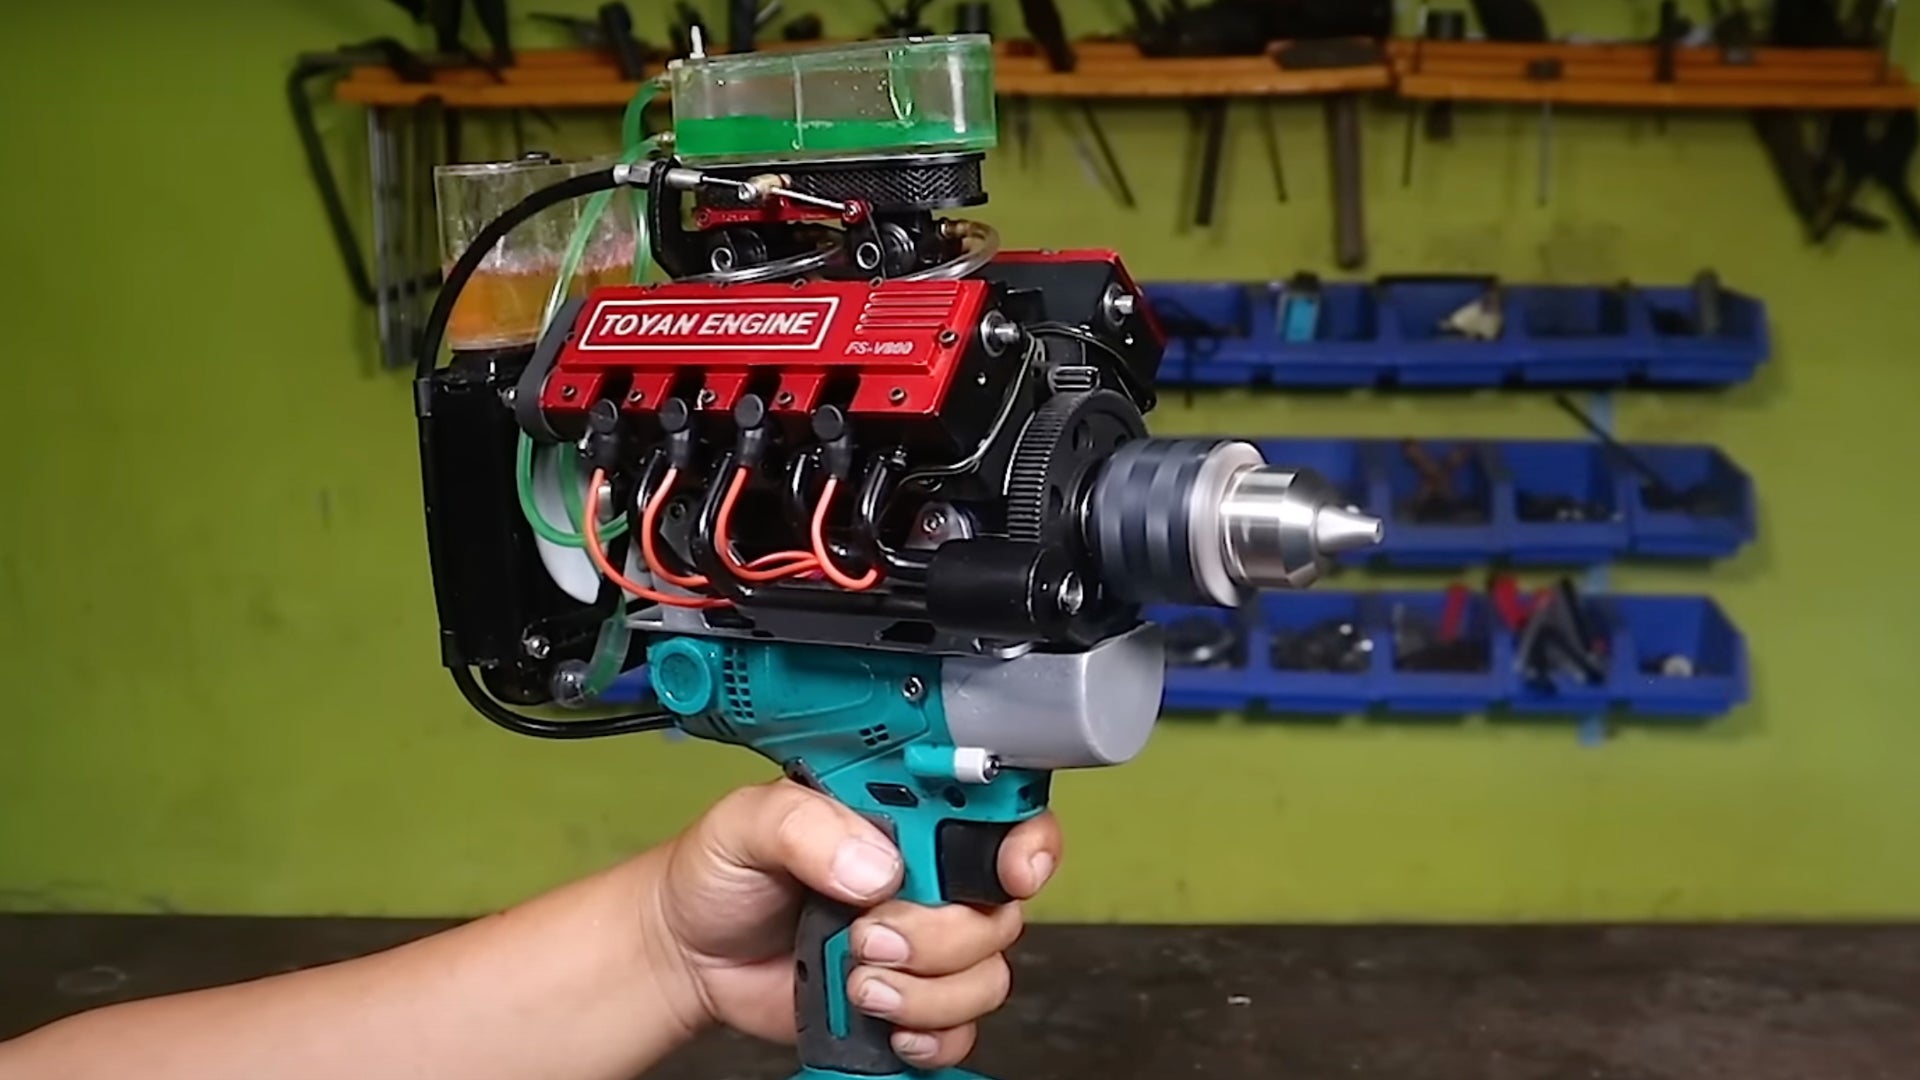 Experience the Roar of a Corvette with the World’s Smallest V8-Powered Drill!